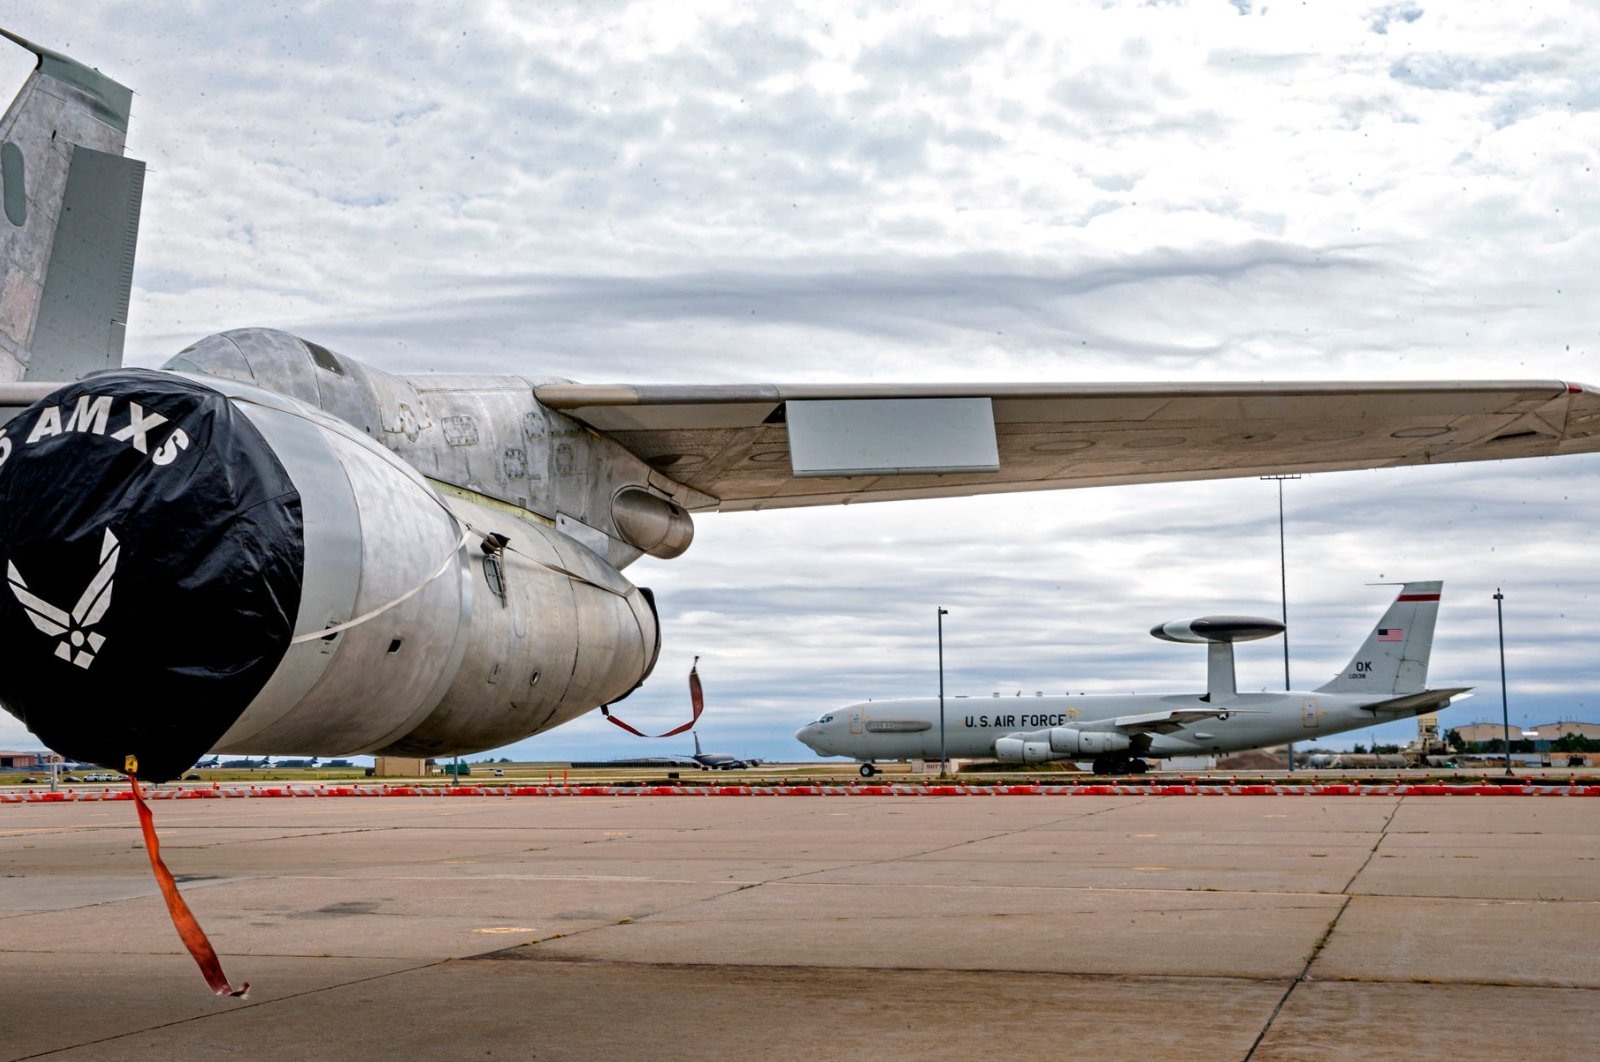 A Boeing 707 AWACS aircraft taxis on the runway before flight at Tinker Air Force Base in Midwest City, Oklahoma, U.S., Oct. 12, 2021. (Reuters Photo)